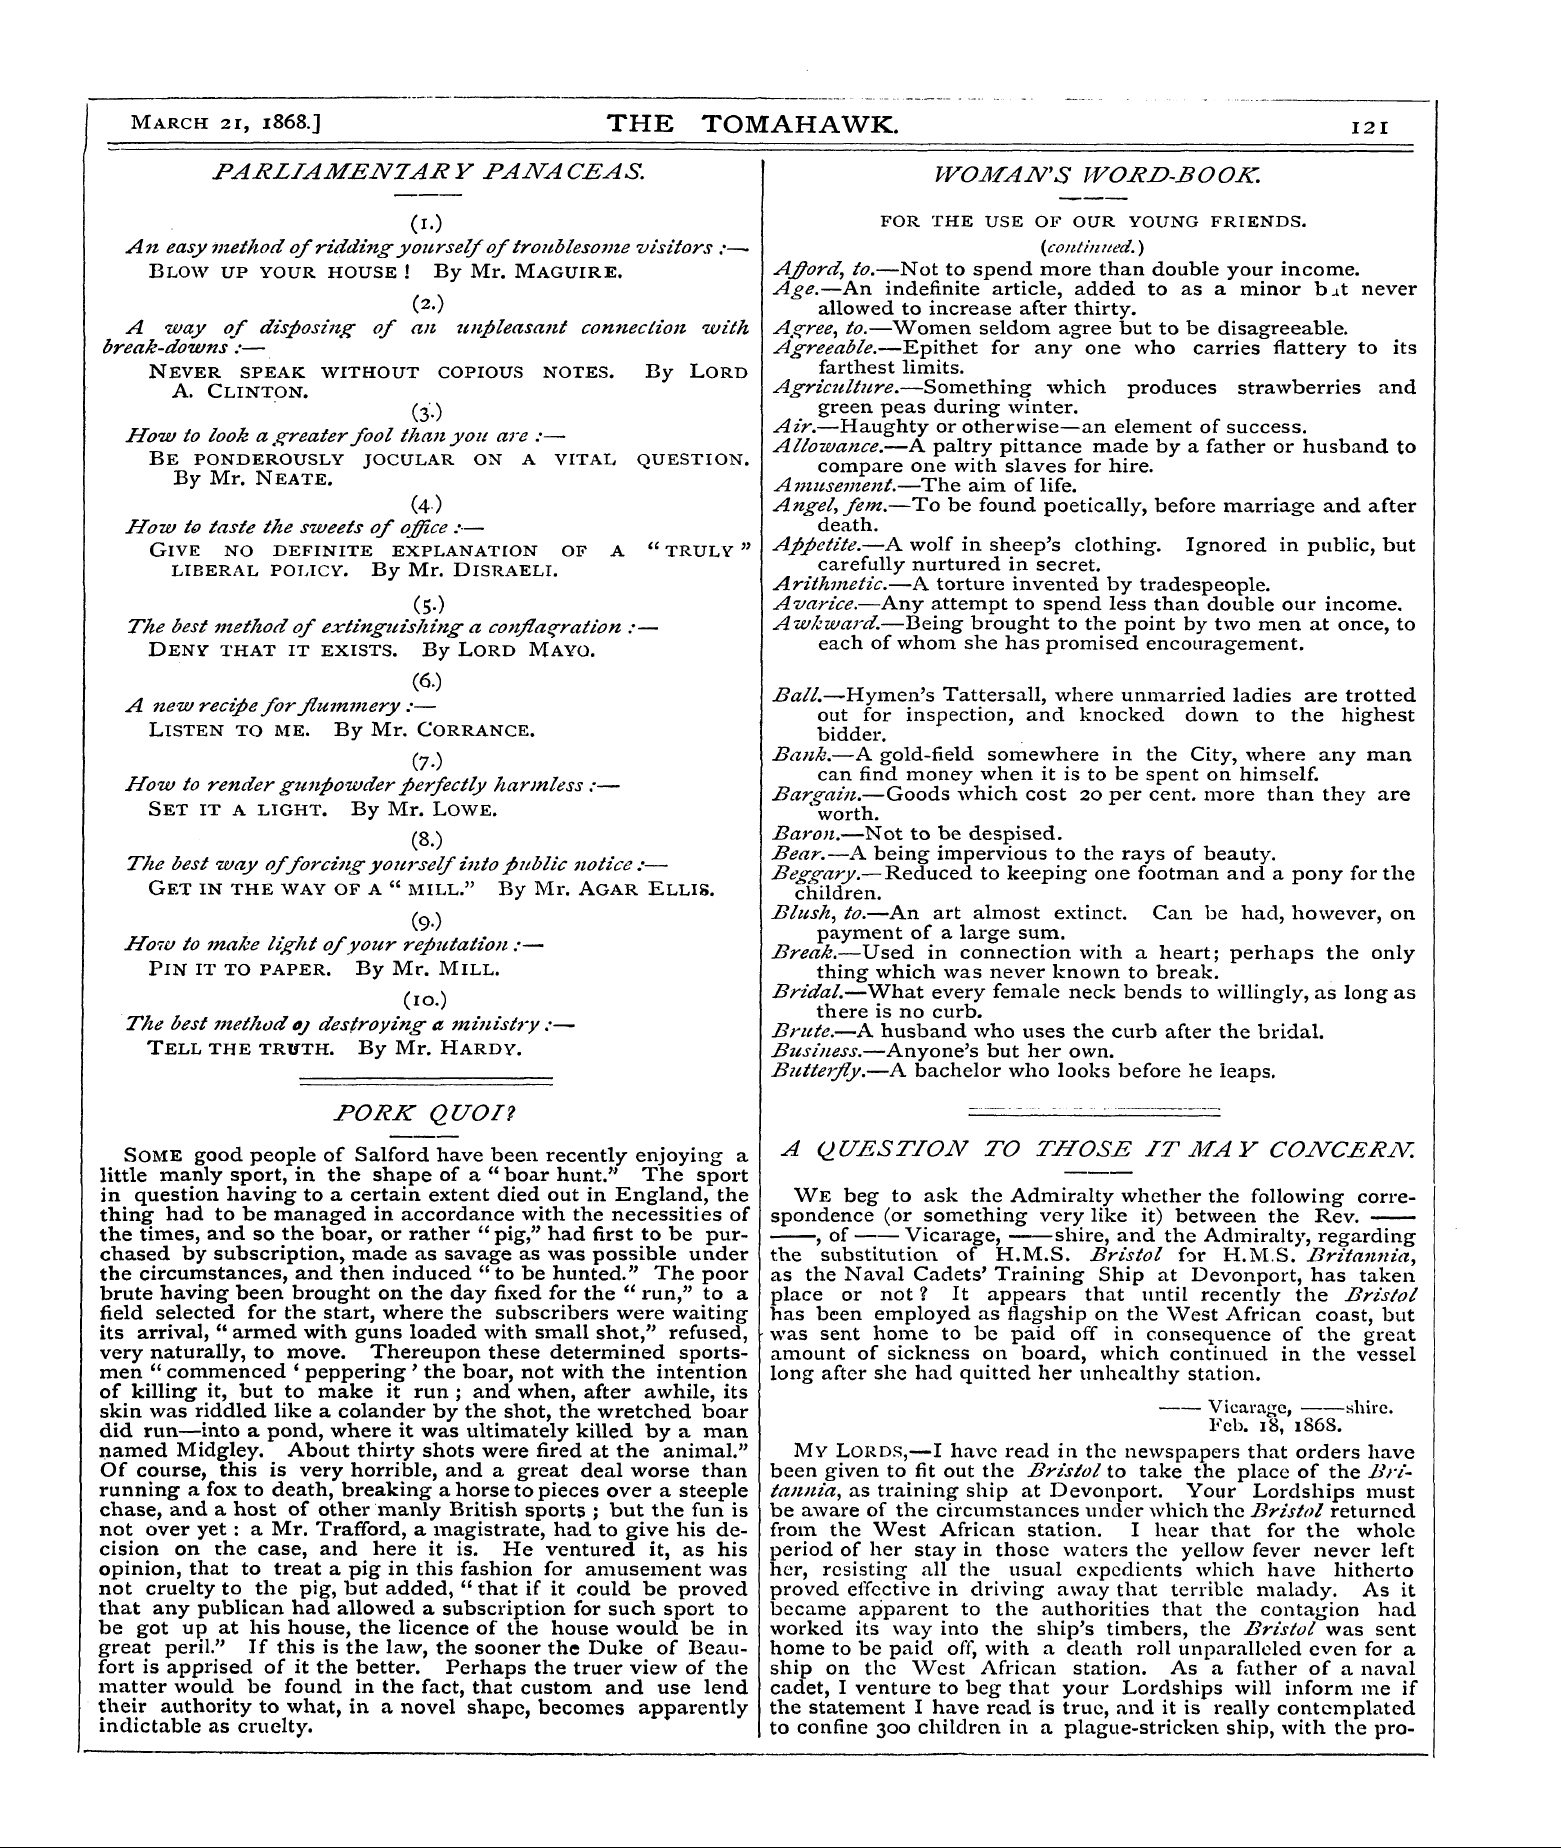 Tomahawk (1867-1870): jS F Y, 1st edition - A Question To Those It May Concern.